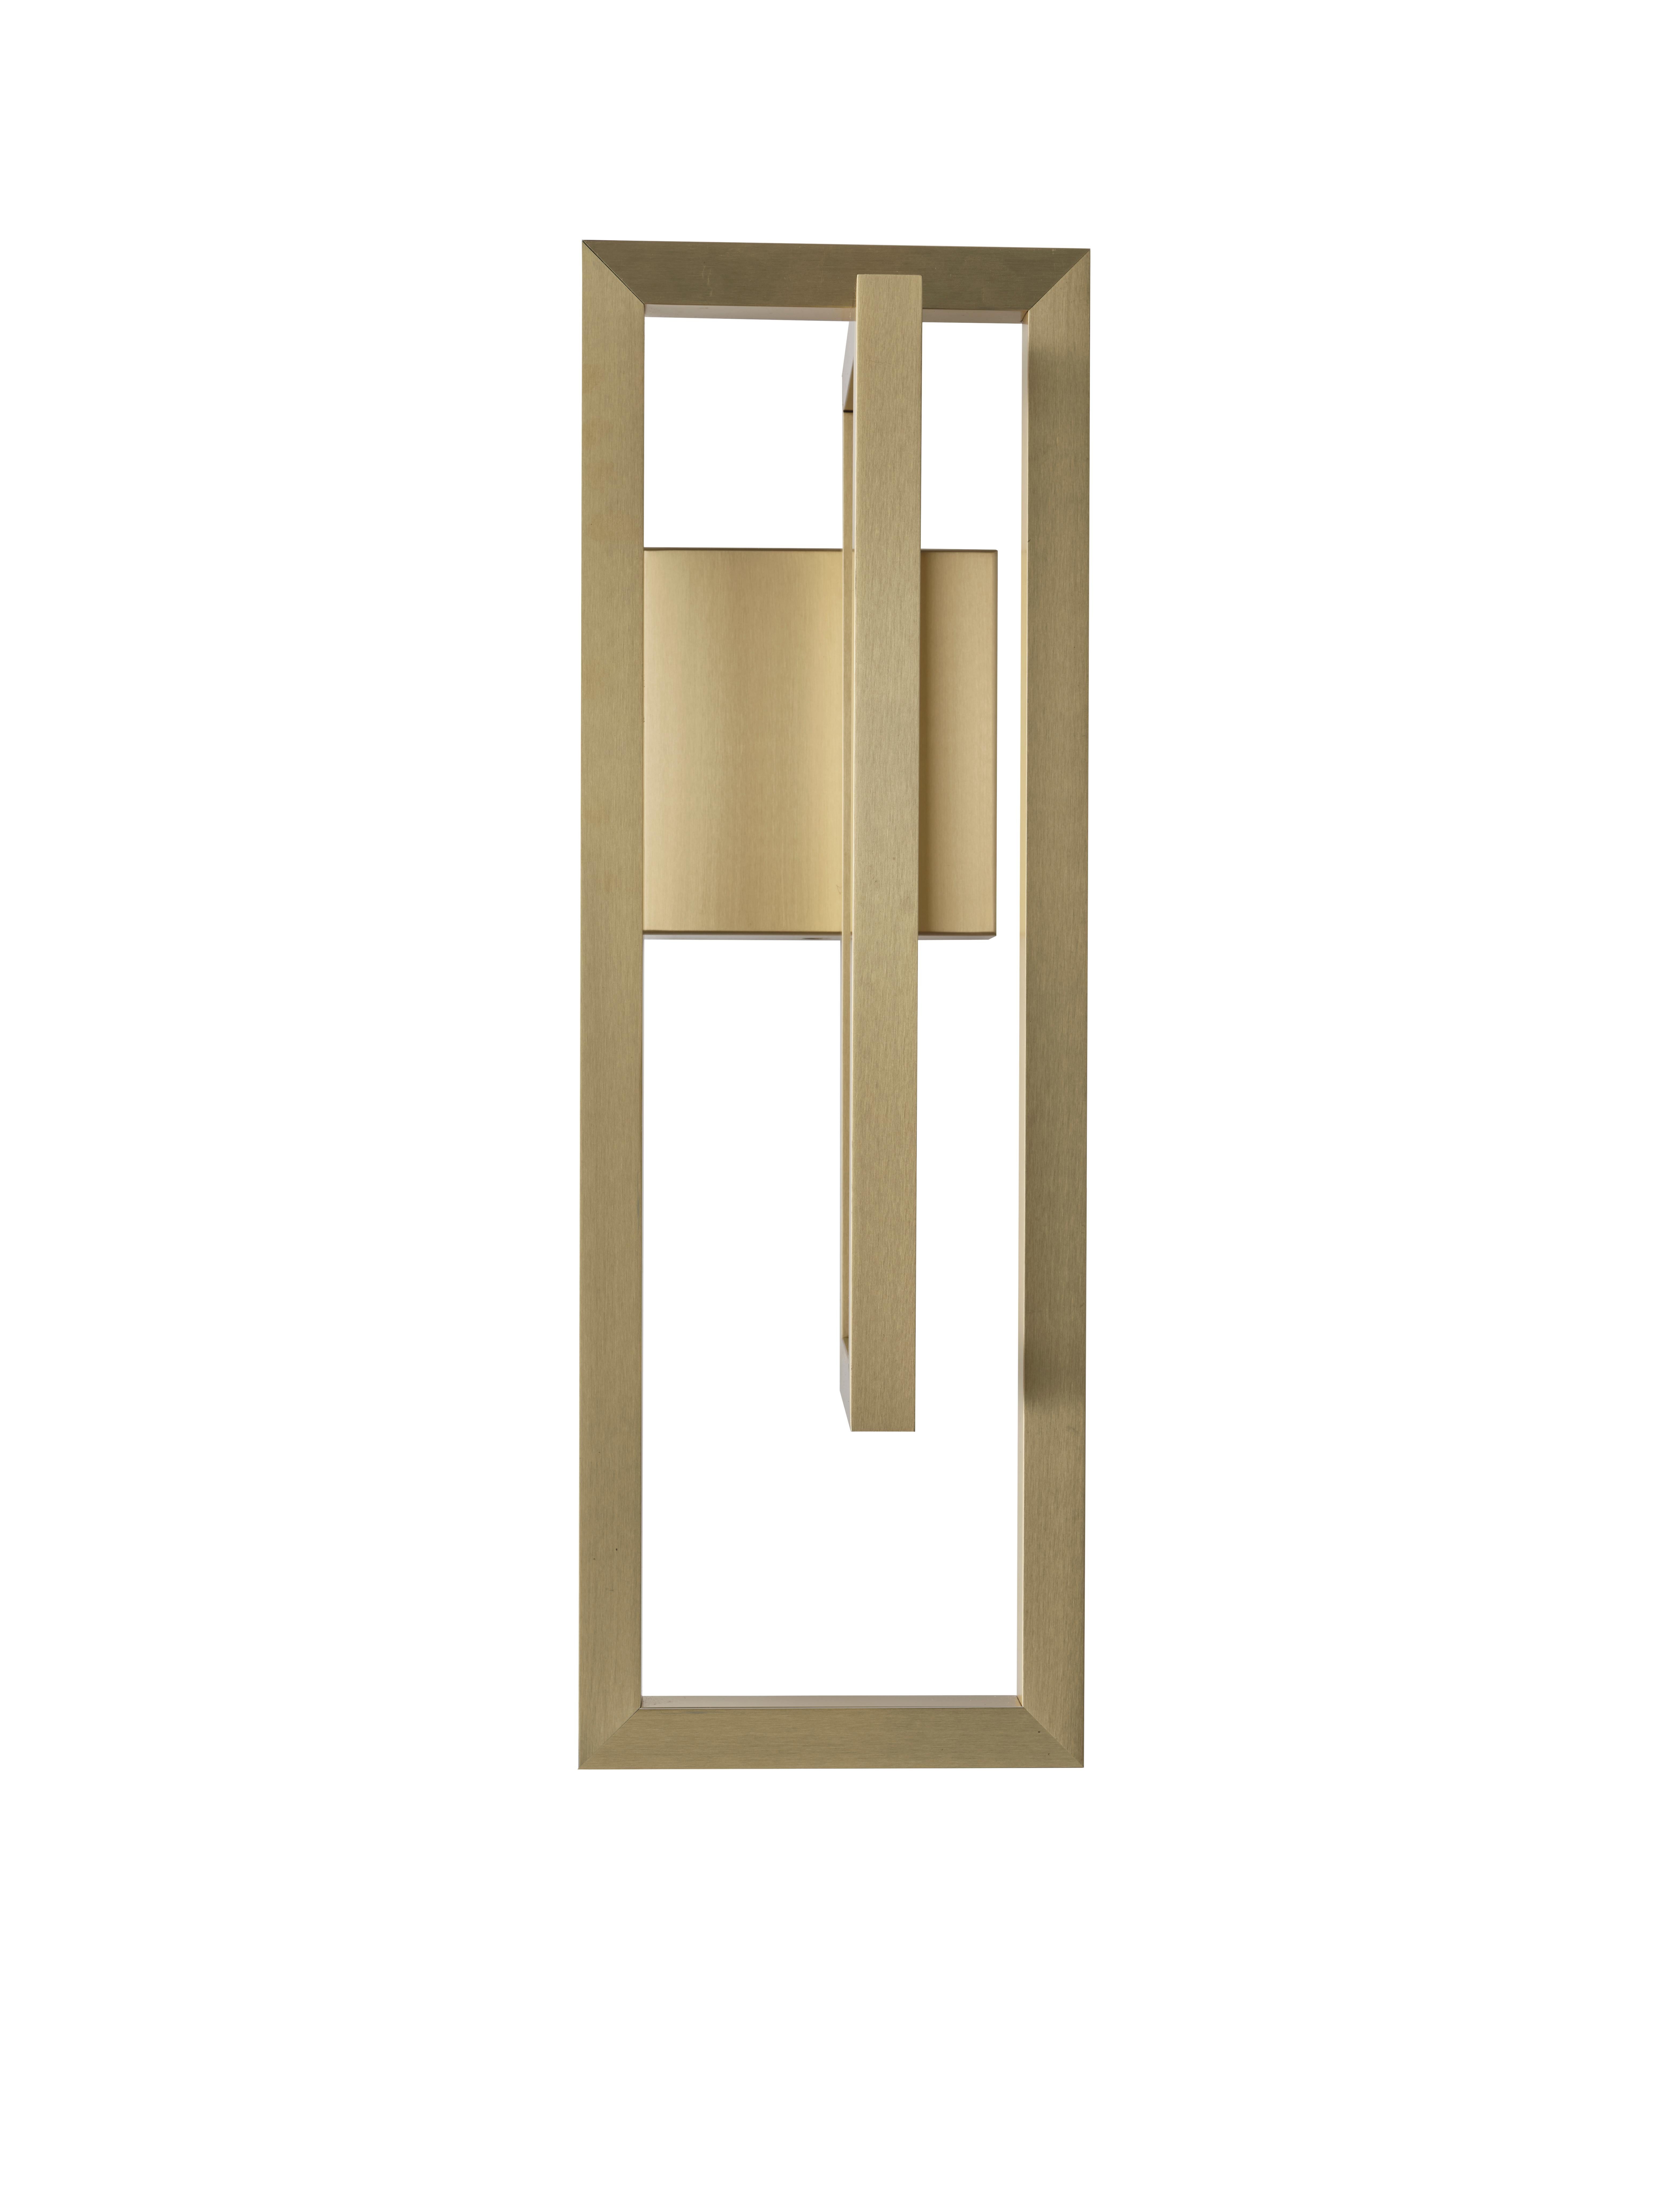 DCW Editions Borely Wall Lamp in Gold Brass by Eric Gizard
 
 Across the globe, light evolves over time.
 From the soft and reassuring light of the candle to the raw LED brightness of the refrigerator light, centuries have passed.
 Are we at the